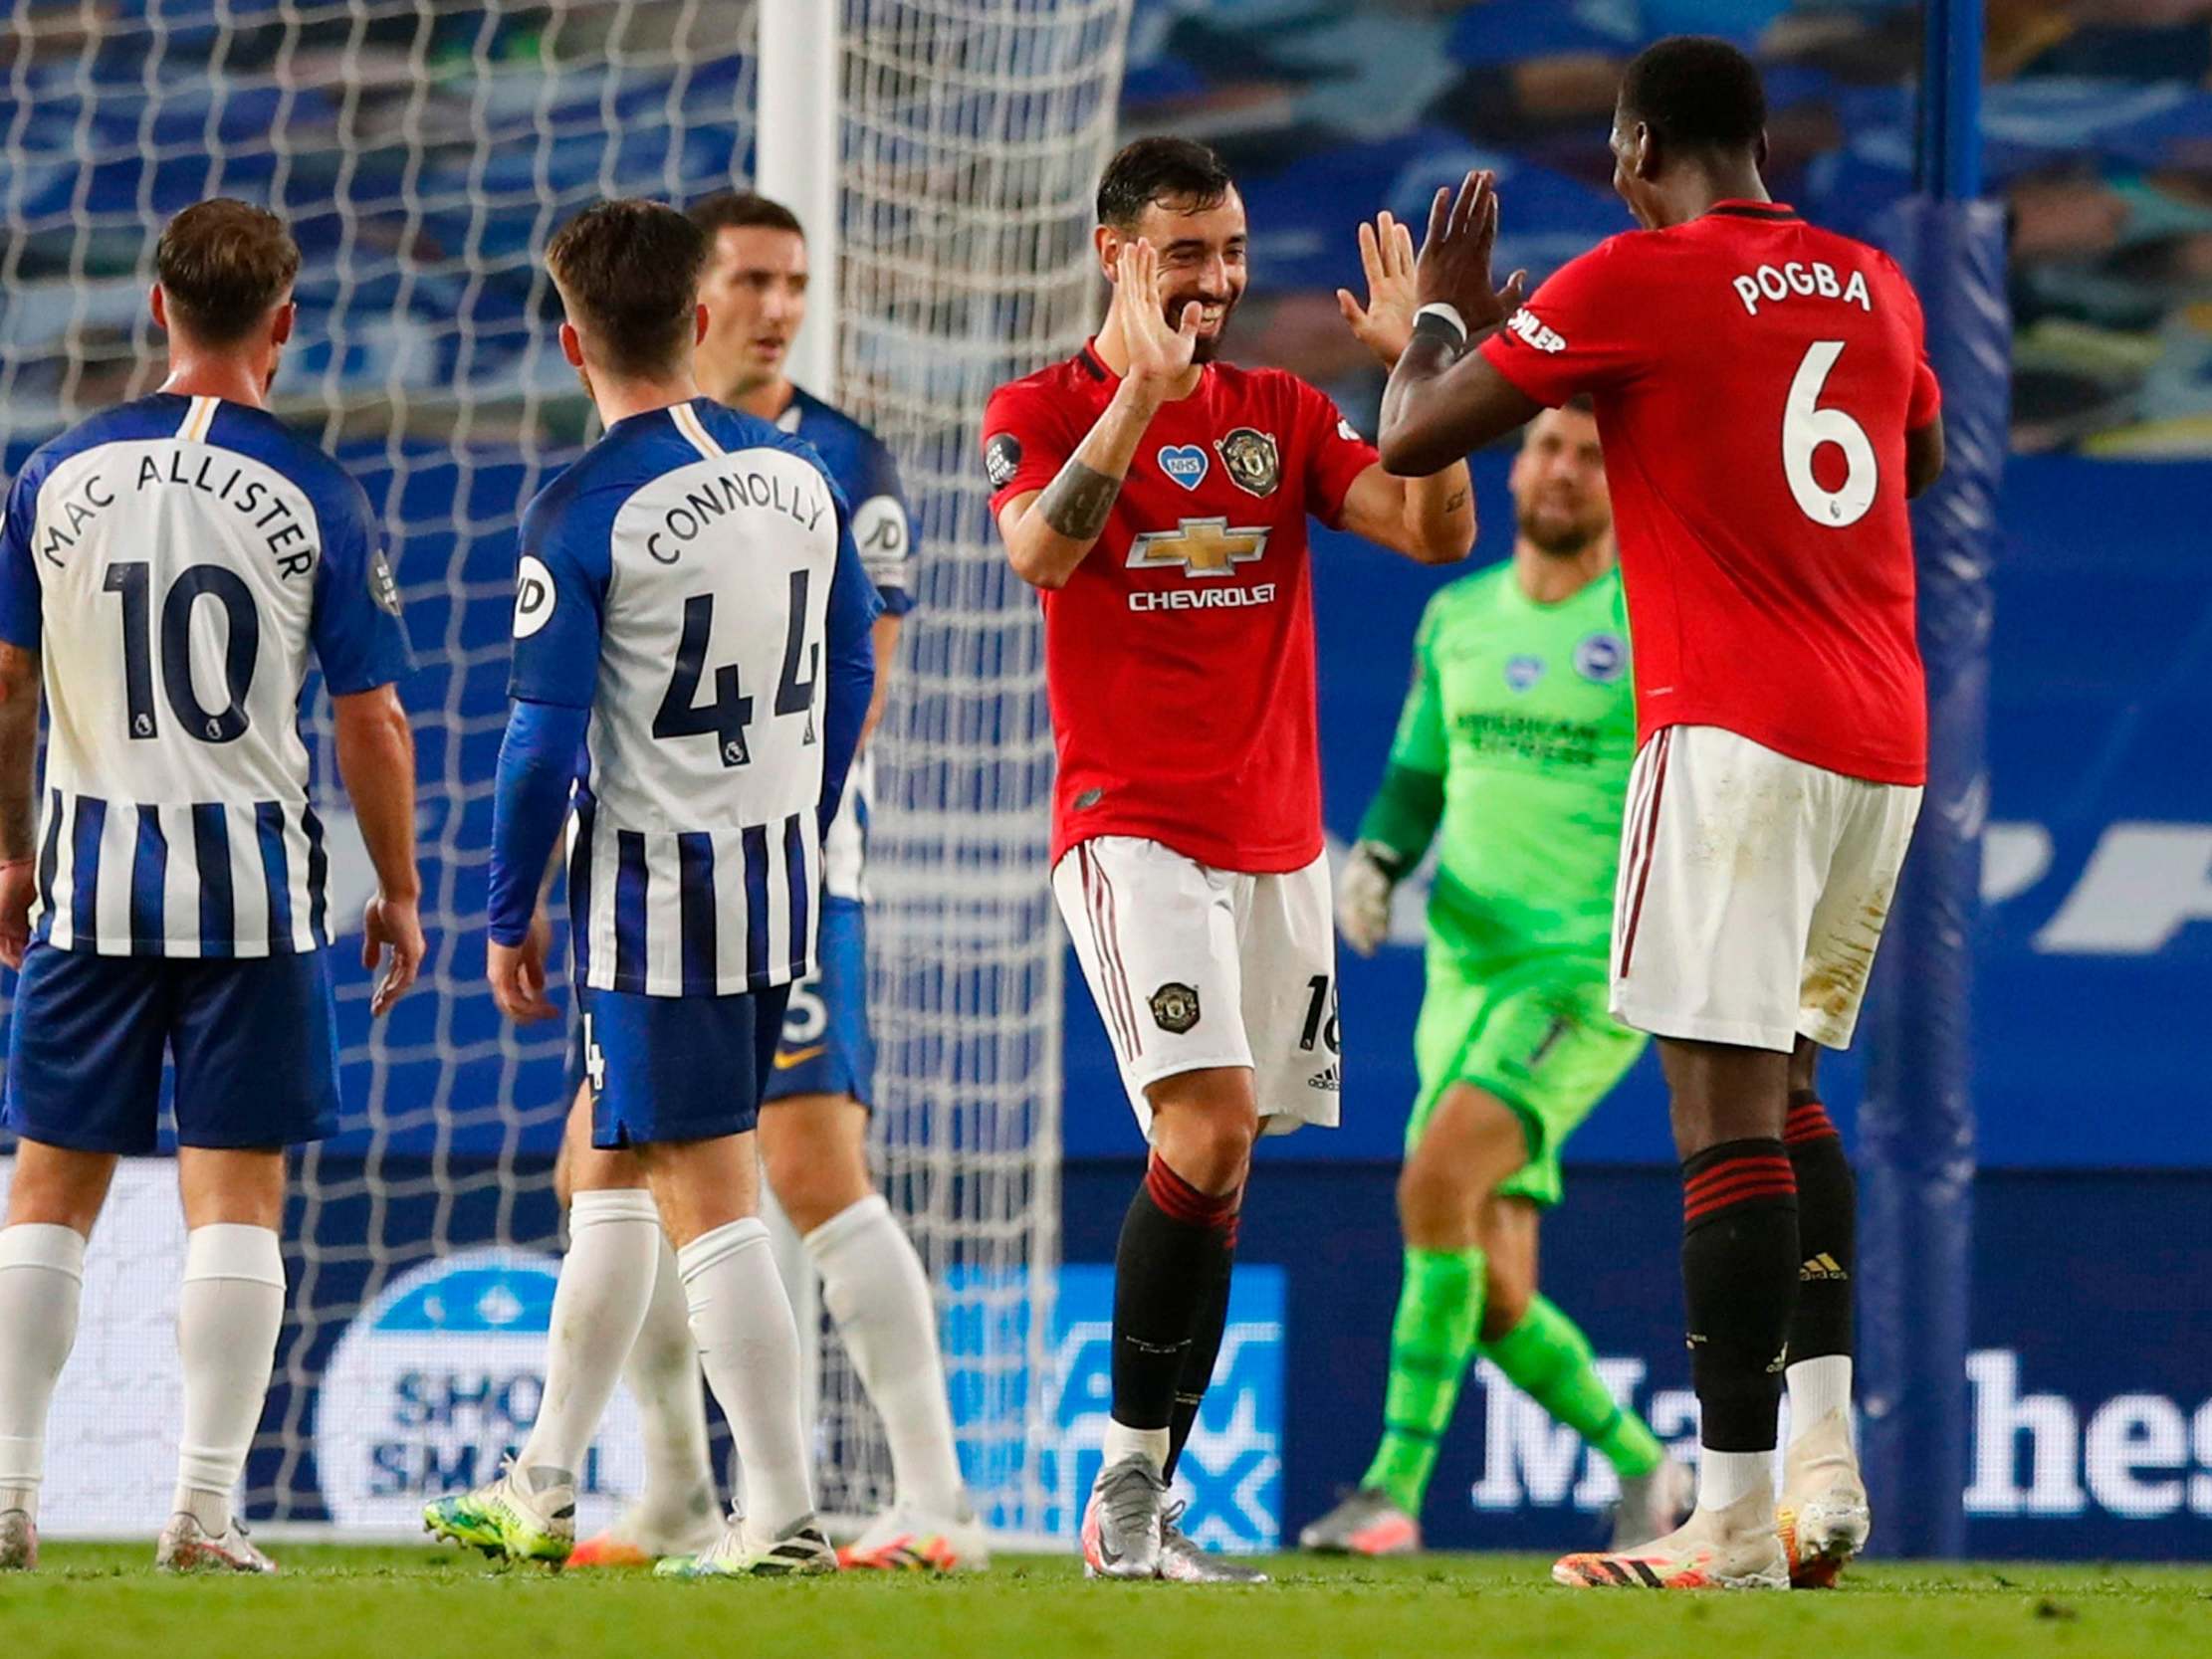 Brighton vs Manchester United: Five things we learned as Paul Pogba and Bruno Fernandes link in style again